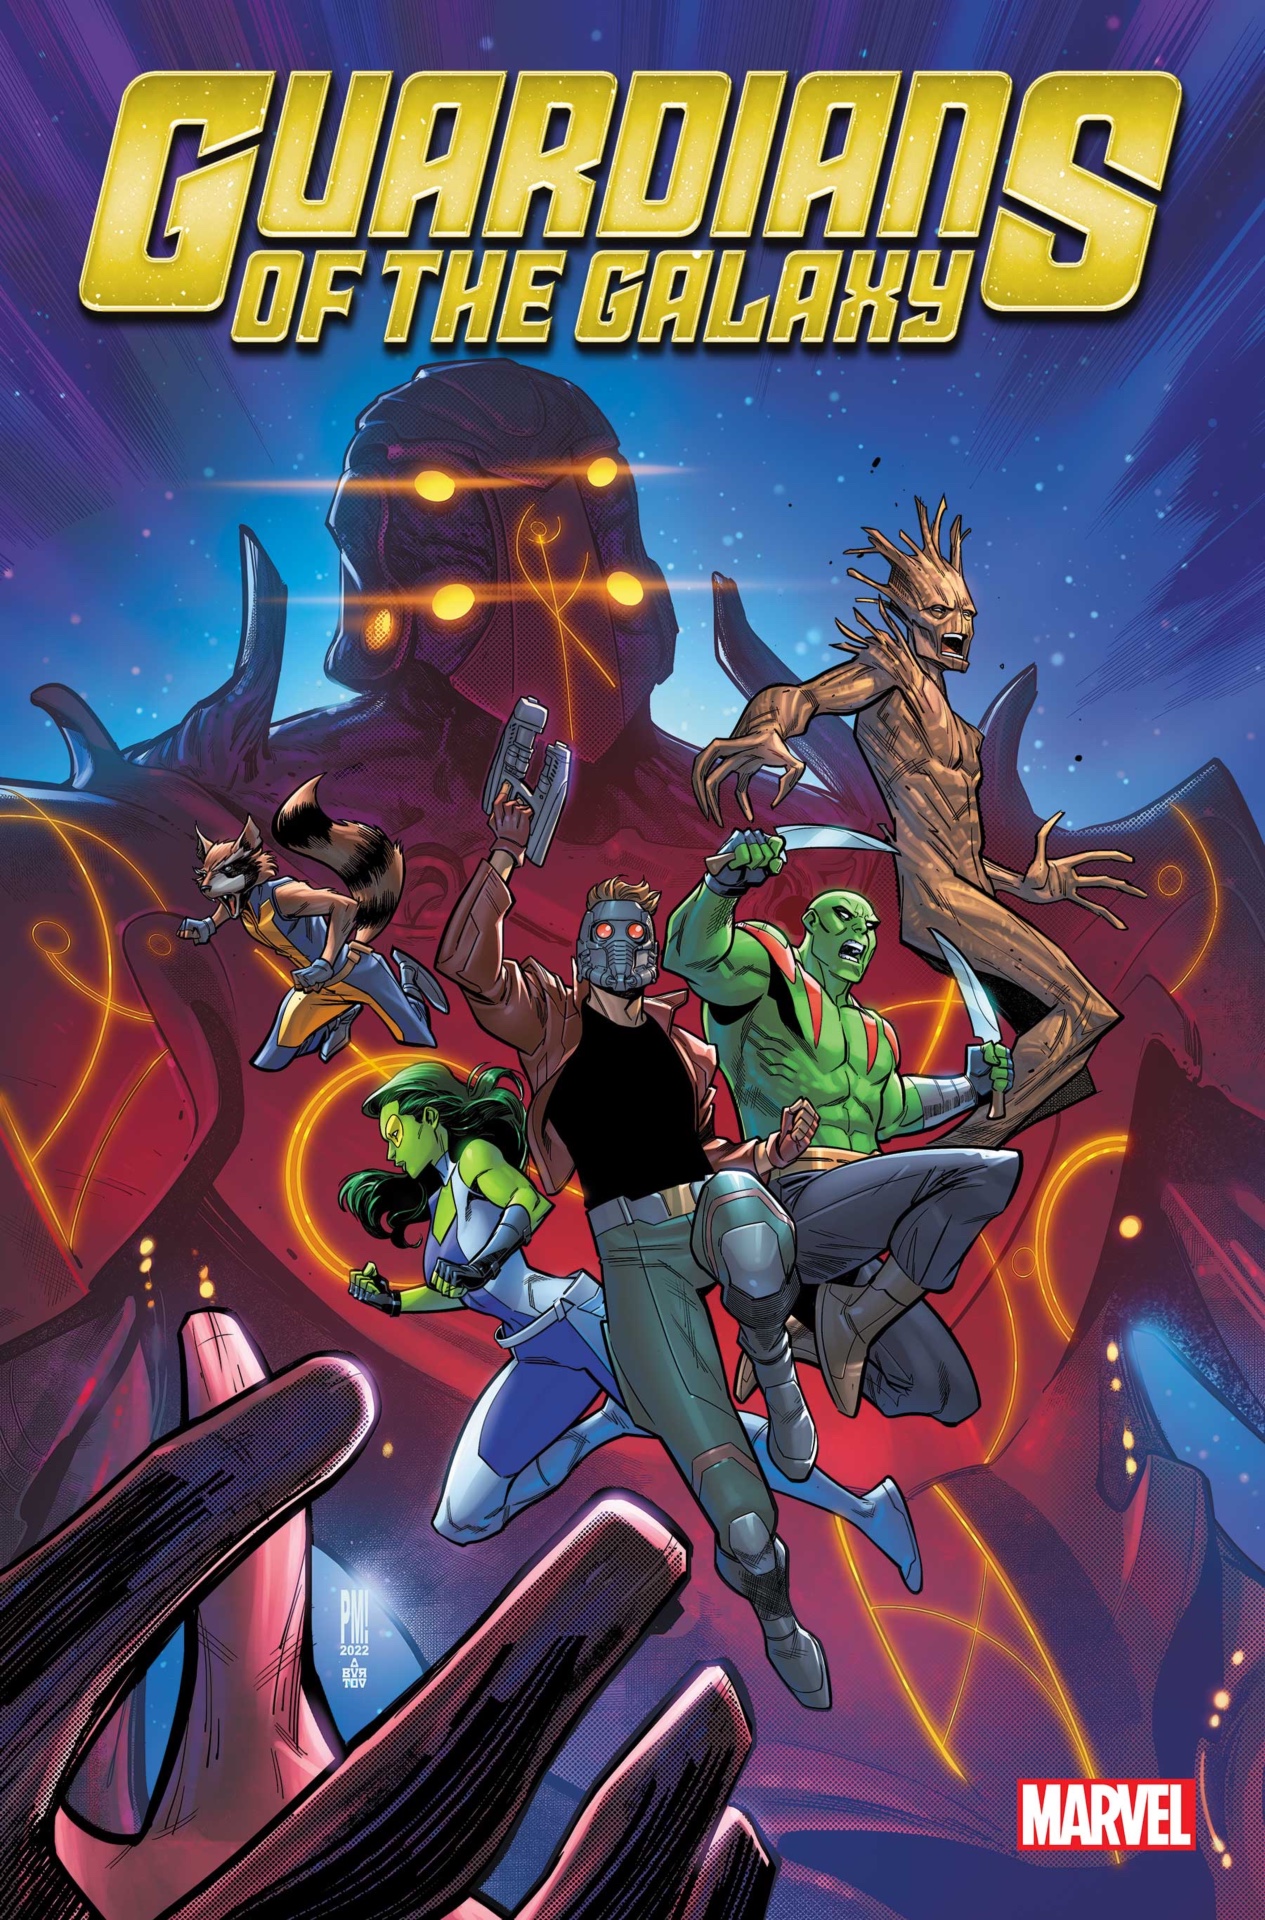 Guardians of the Galaxy: Cosmic Rewind comic book tells the story of the new Disneyworld ride